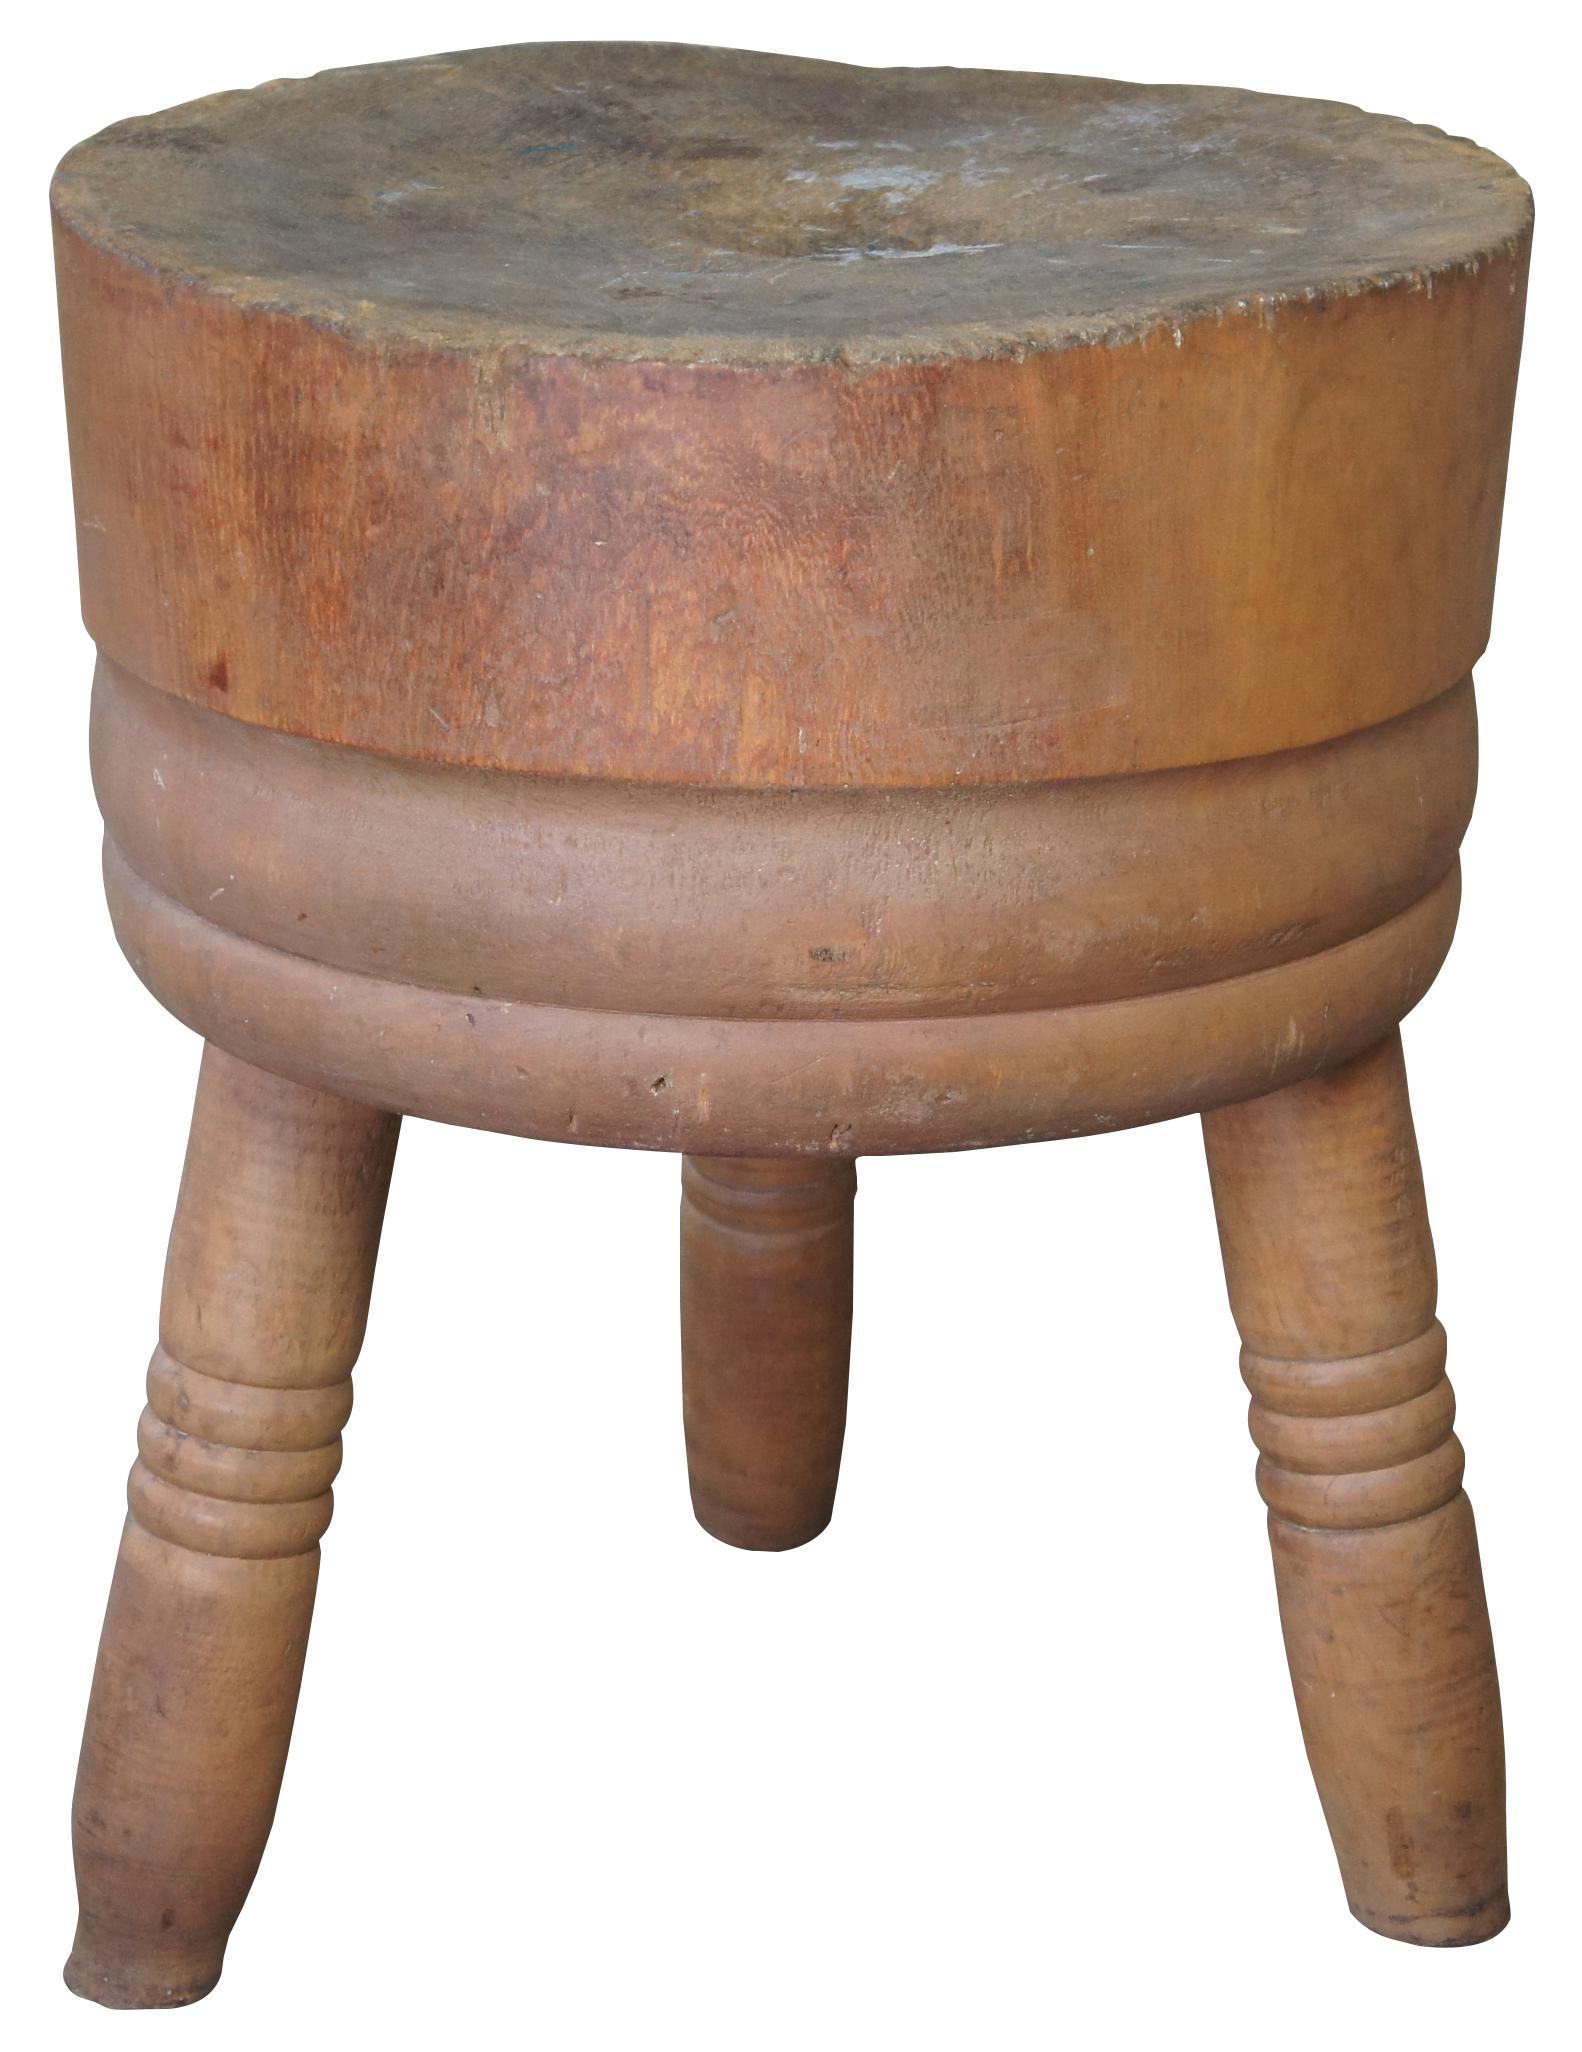 Antique farmhouse butcher block cutting board. Made of pine featuring round tripod form with turned legs. Pedestal, side accent table, plant stand. Measure: 28